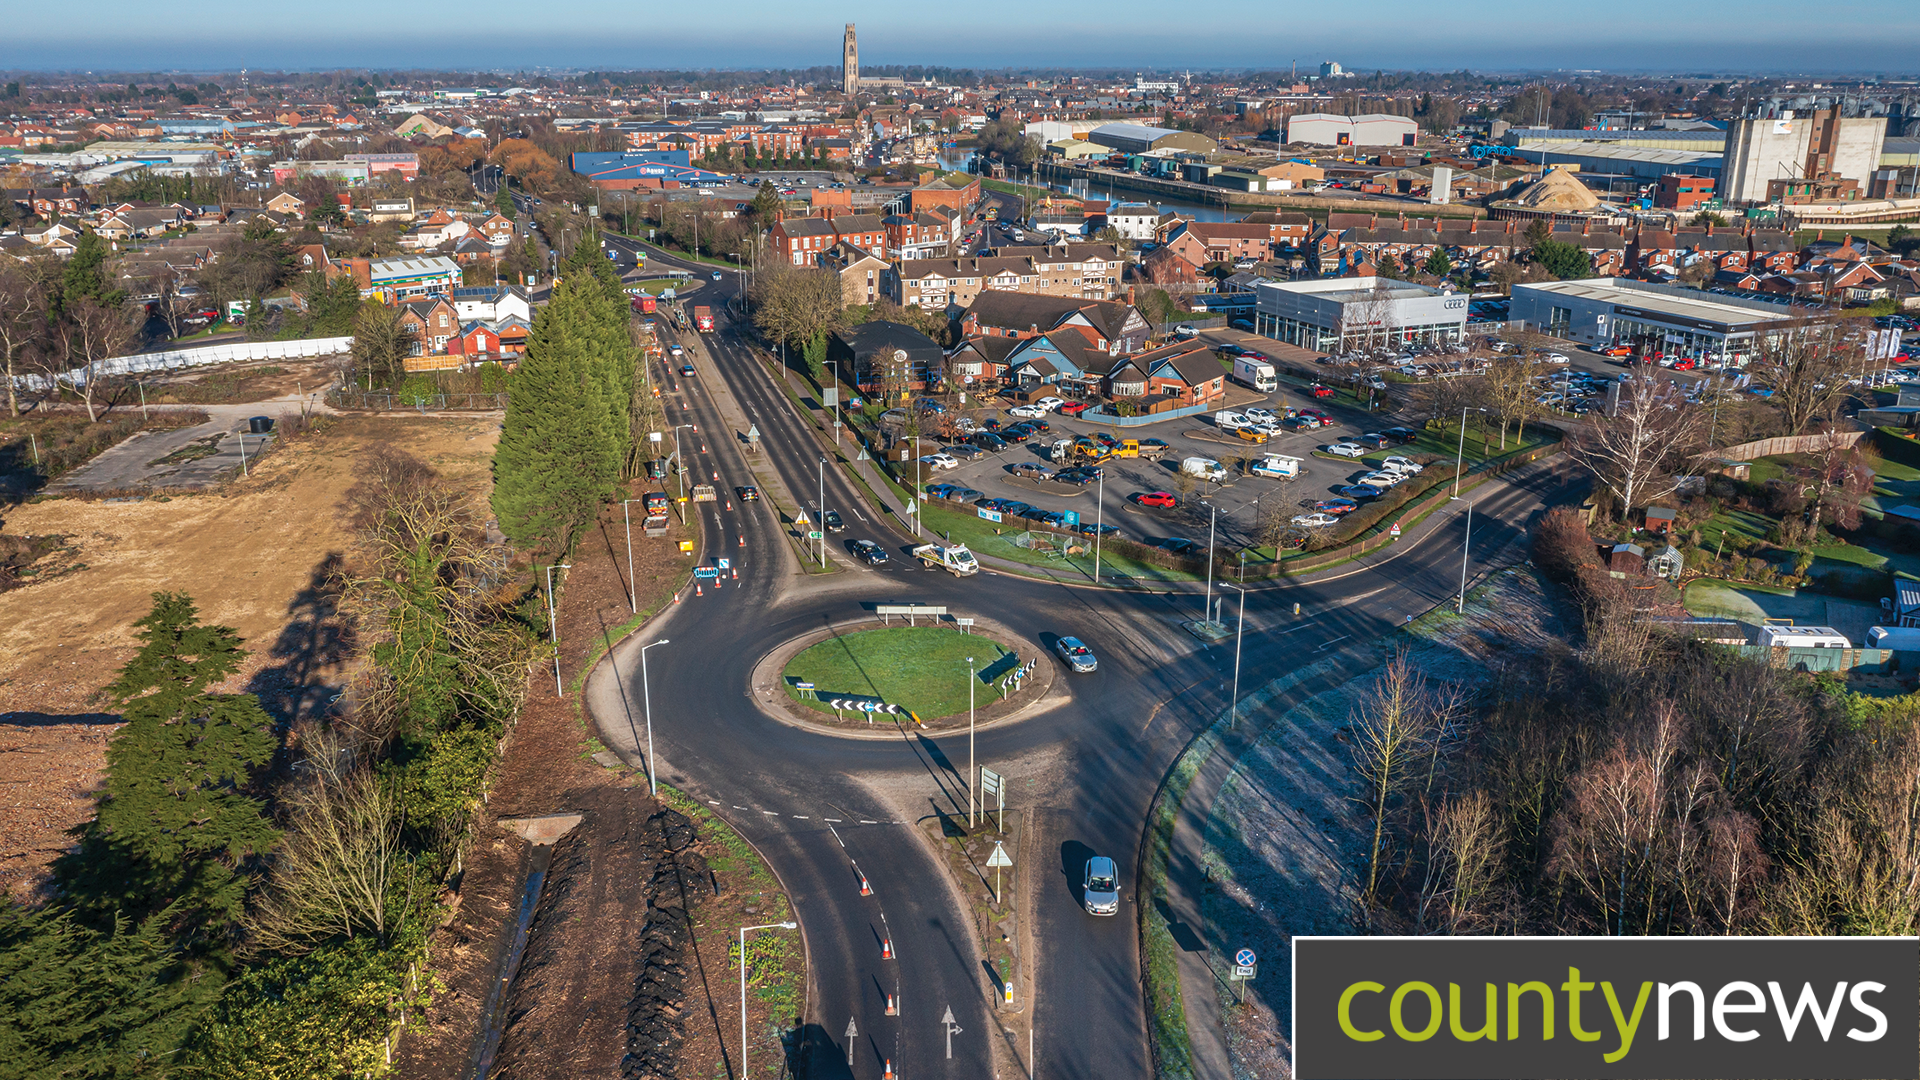 An image taken from above at Marsh Lane roundabout in Boston